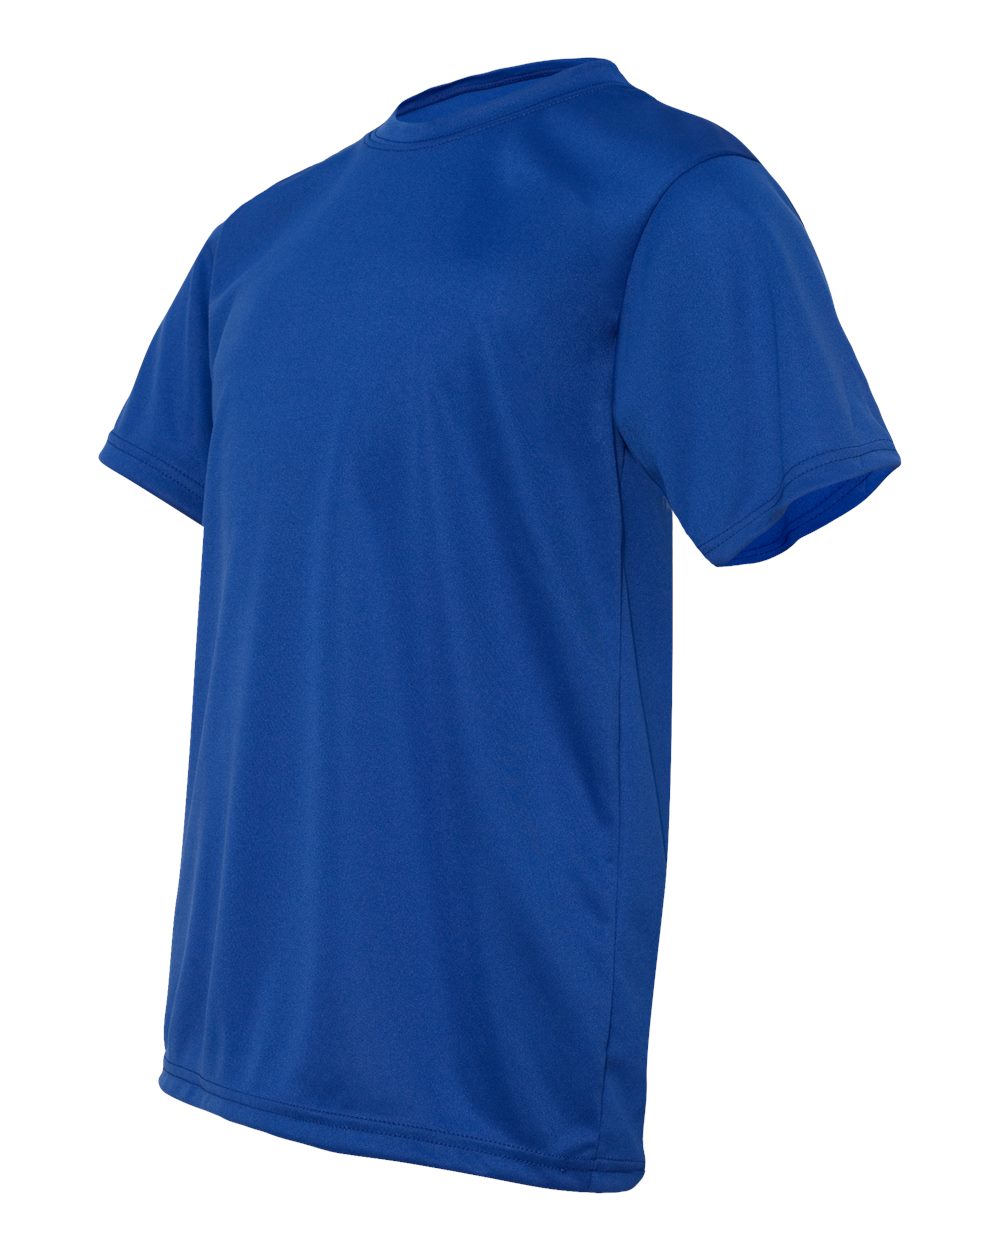 C2 Sport Youth Performance T-Shirt 5200 #color_Royal